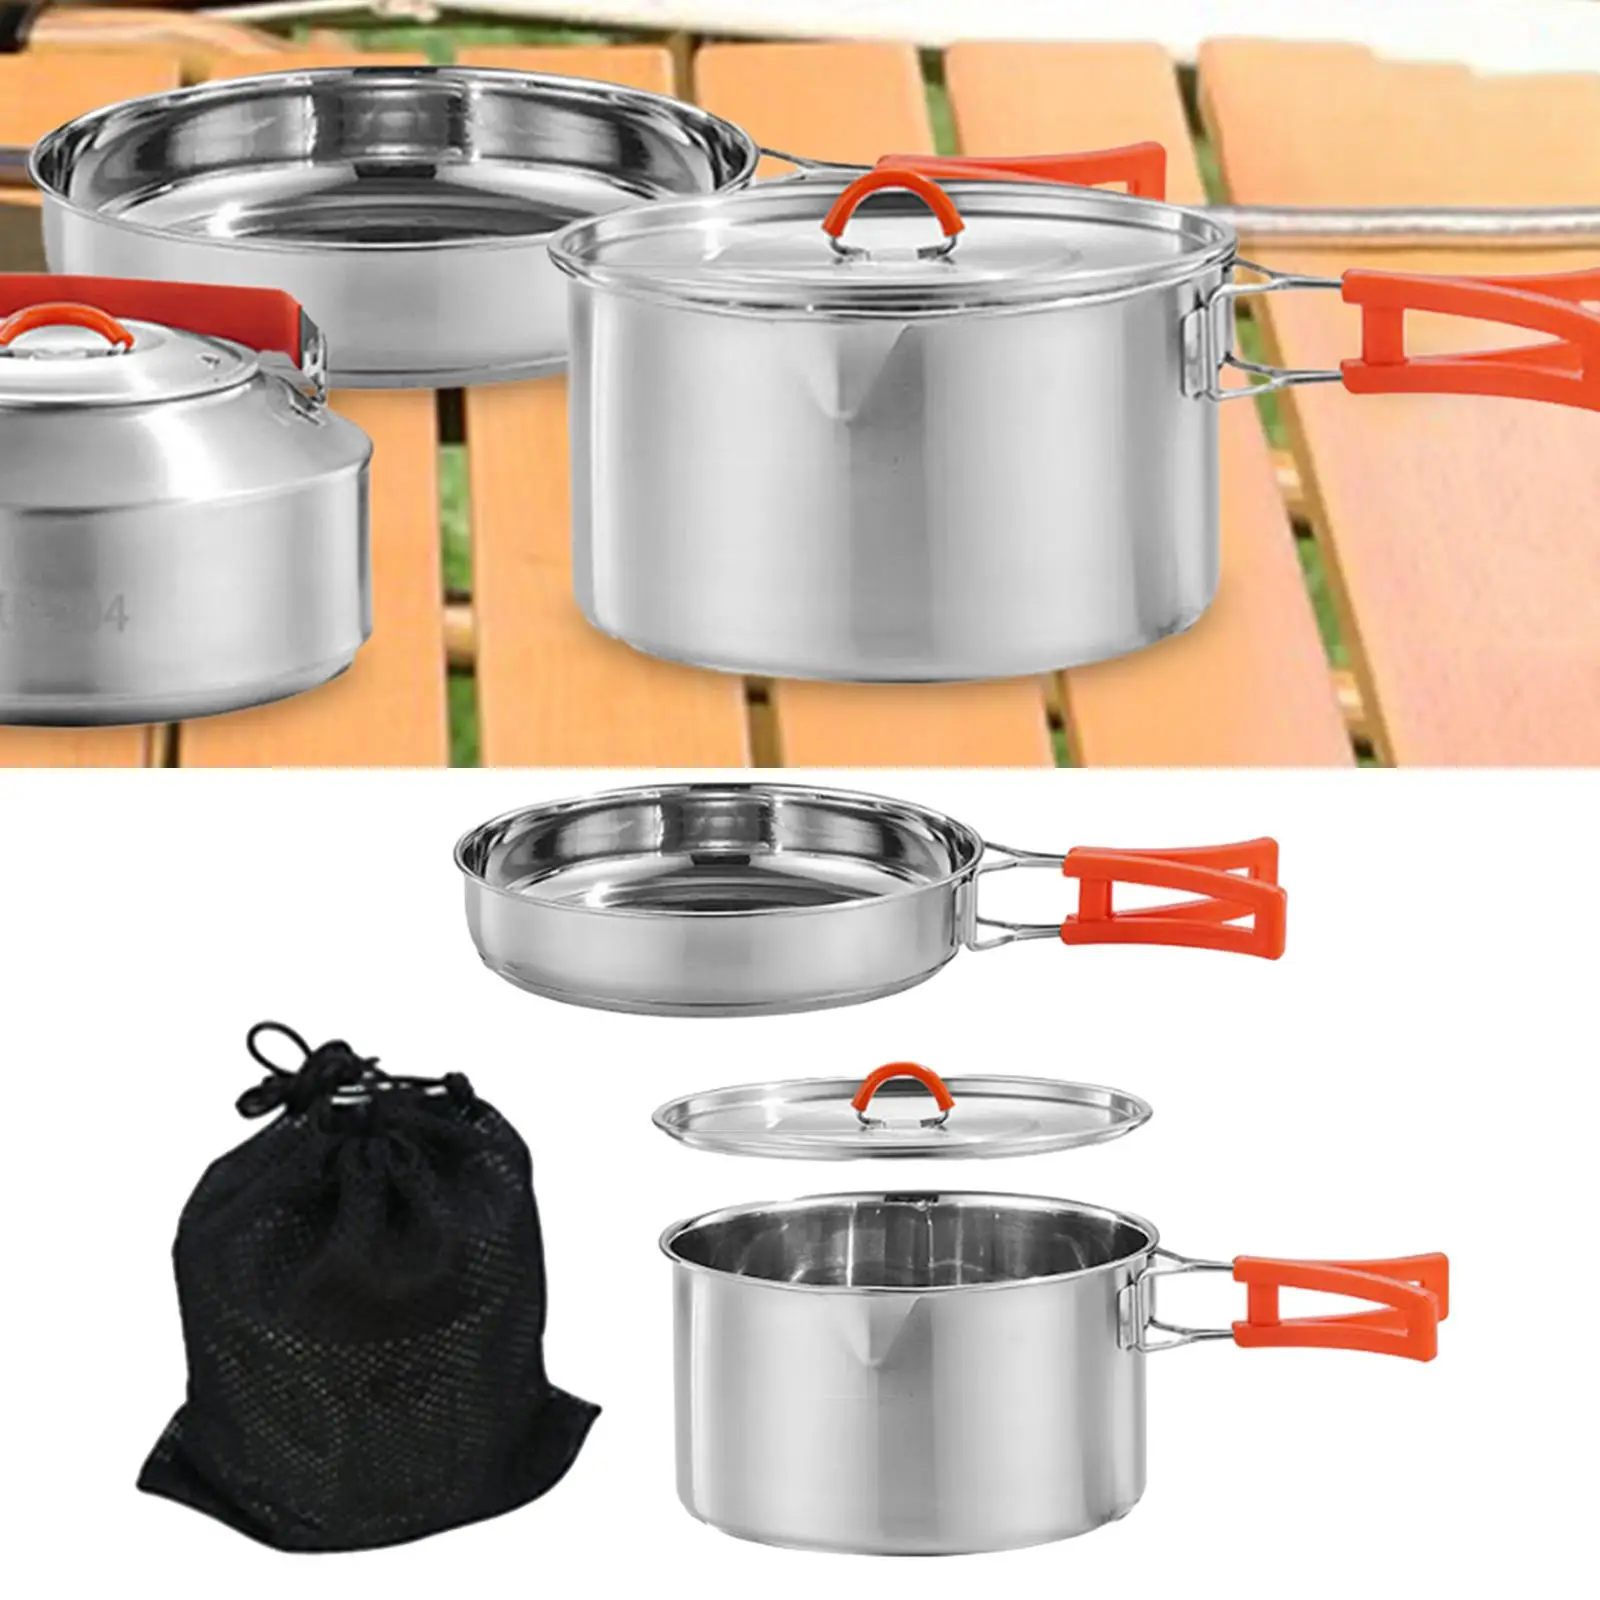 Camping Cookware Set with Folding Handles Portable Included Mesh Carry Bag for Hiking Picnic Backpacking Outdoor Equipment